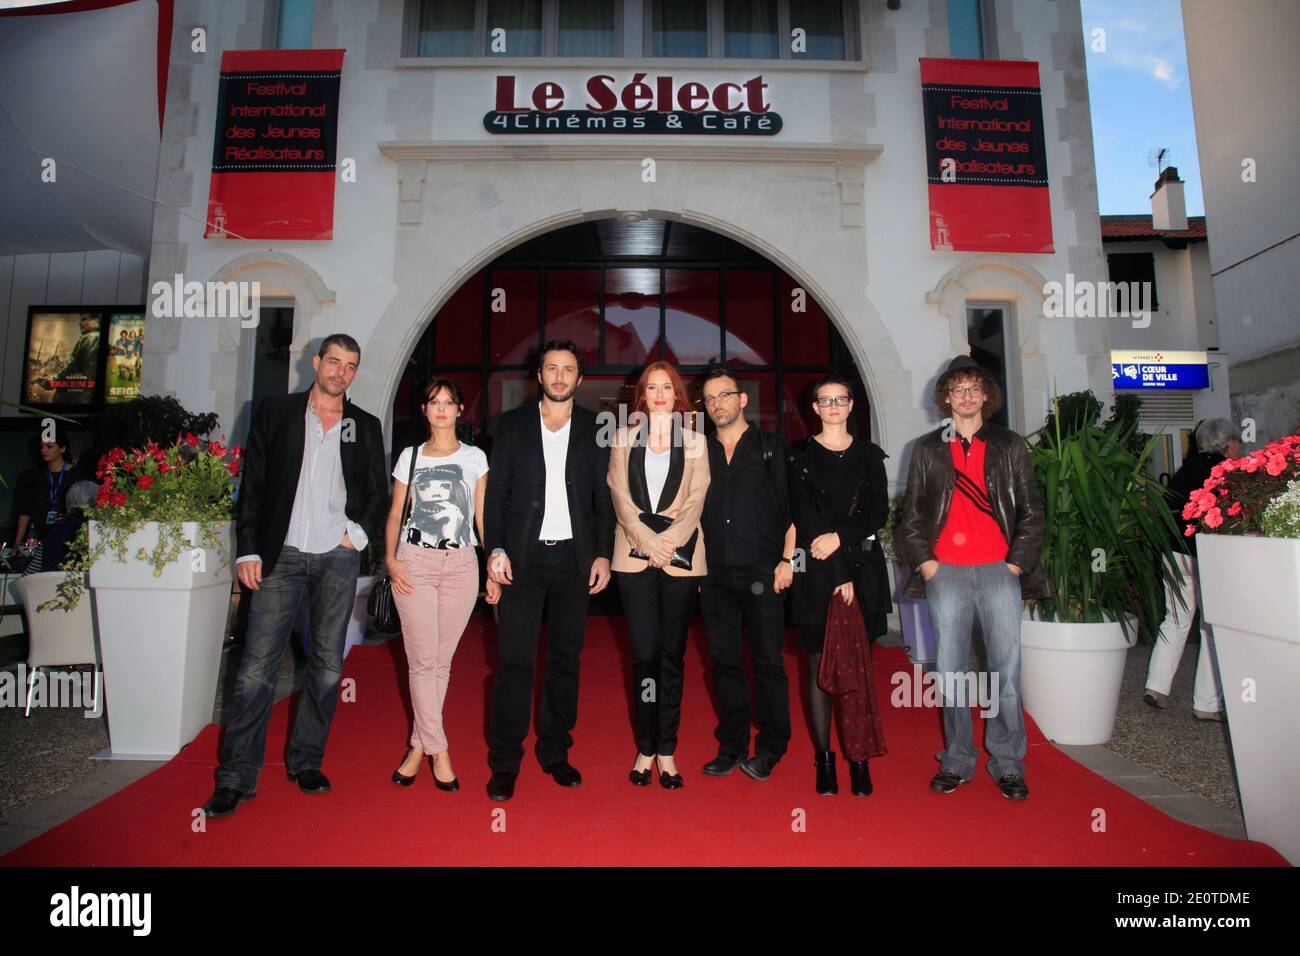 Jury's members (L to R) Thierry Neuvic, Elodie Navarre, Michael Cohen, Audrey Fleurot, Cyril Mennegun, Pauline Etienne and Julien Courbey pose for photographers during the opening of the 17th Young Directors International Film Festival in Saint-Jean-de-Luz, France on October 09, 2012. Photo by Jerome Domine/ABACAPRESS.COM Stock Photo